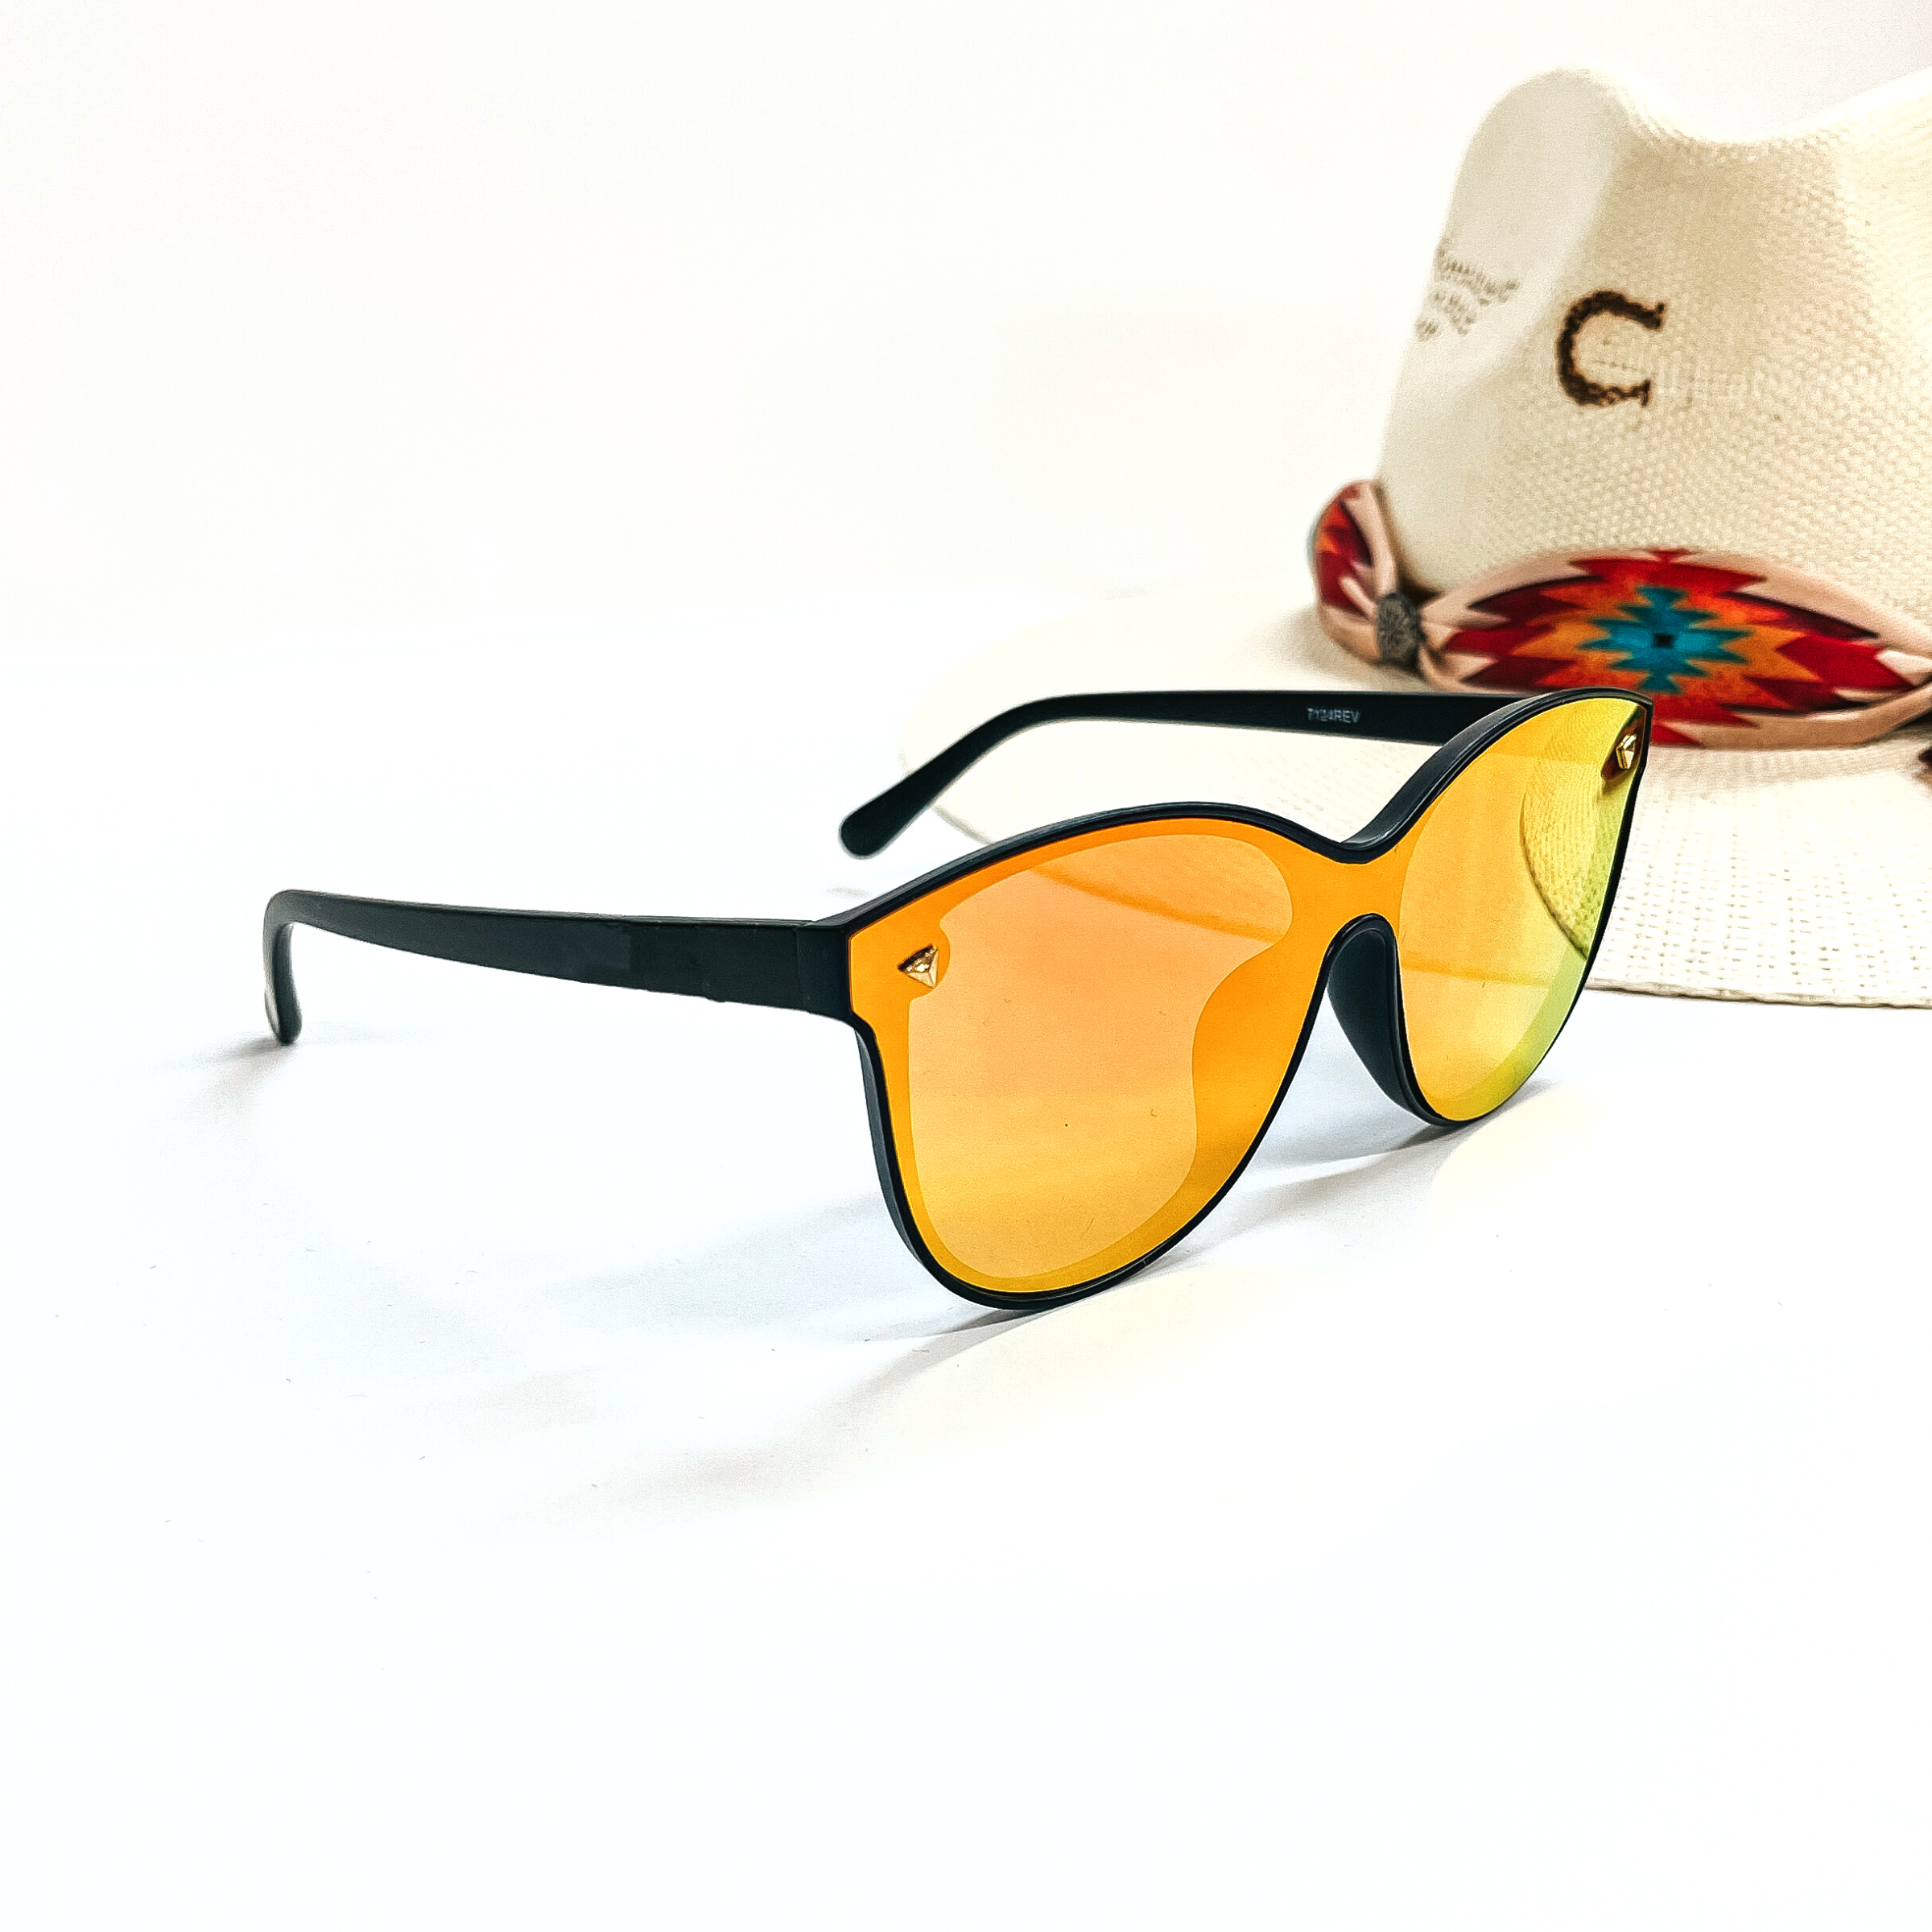 This is a pair of black matte frame sunglasses with an orange/red  mirrored lense and silver tone  detailing. This pair of sunglasses are taken on a white background and an ivory straw hat  with a colorful aztec print hat band in the back as  decor.